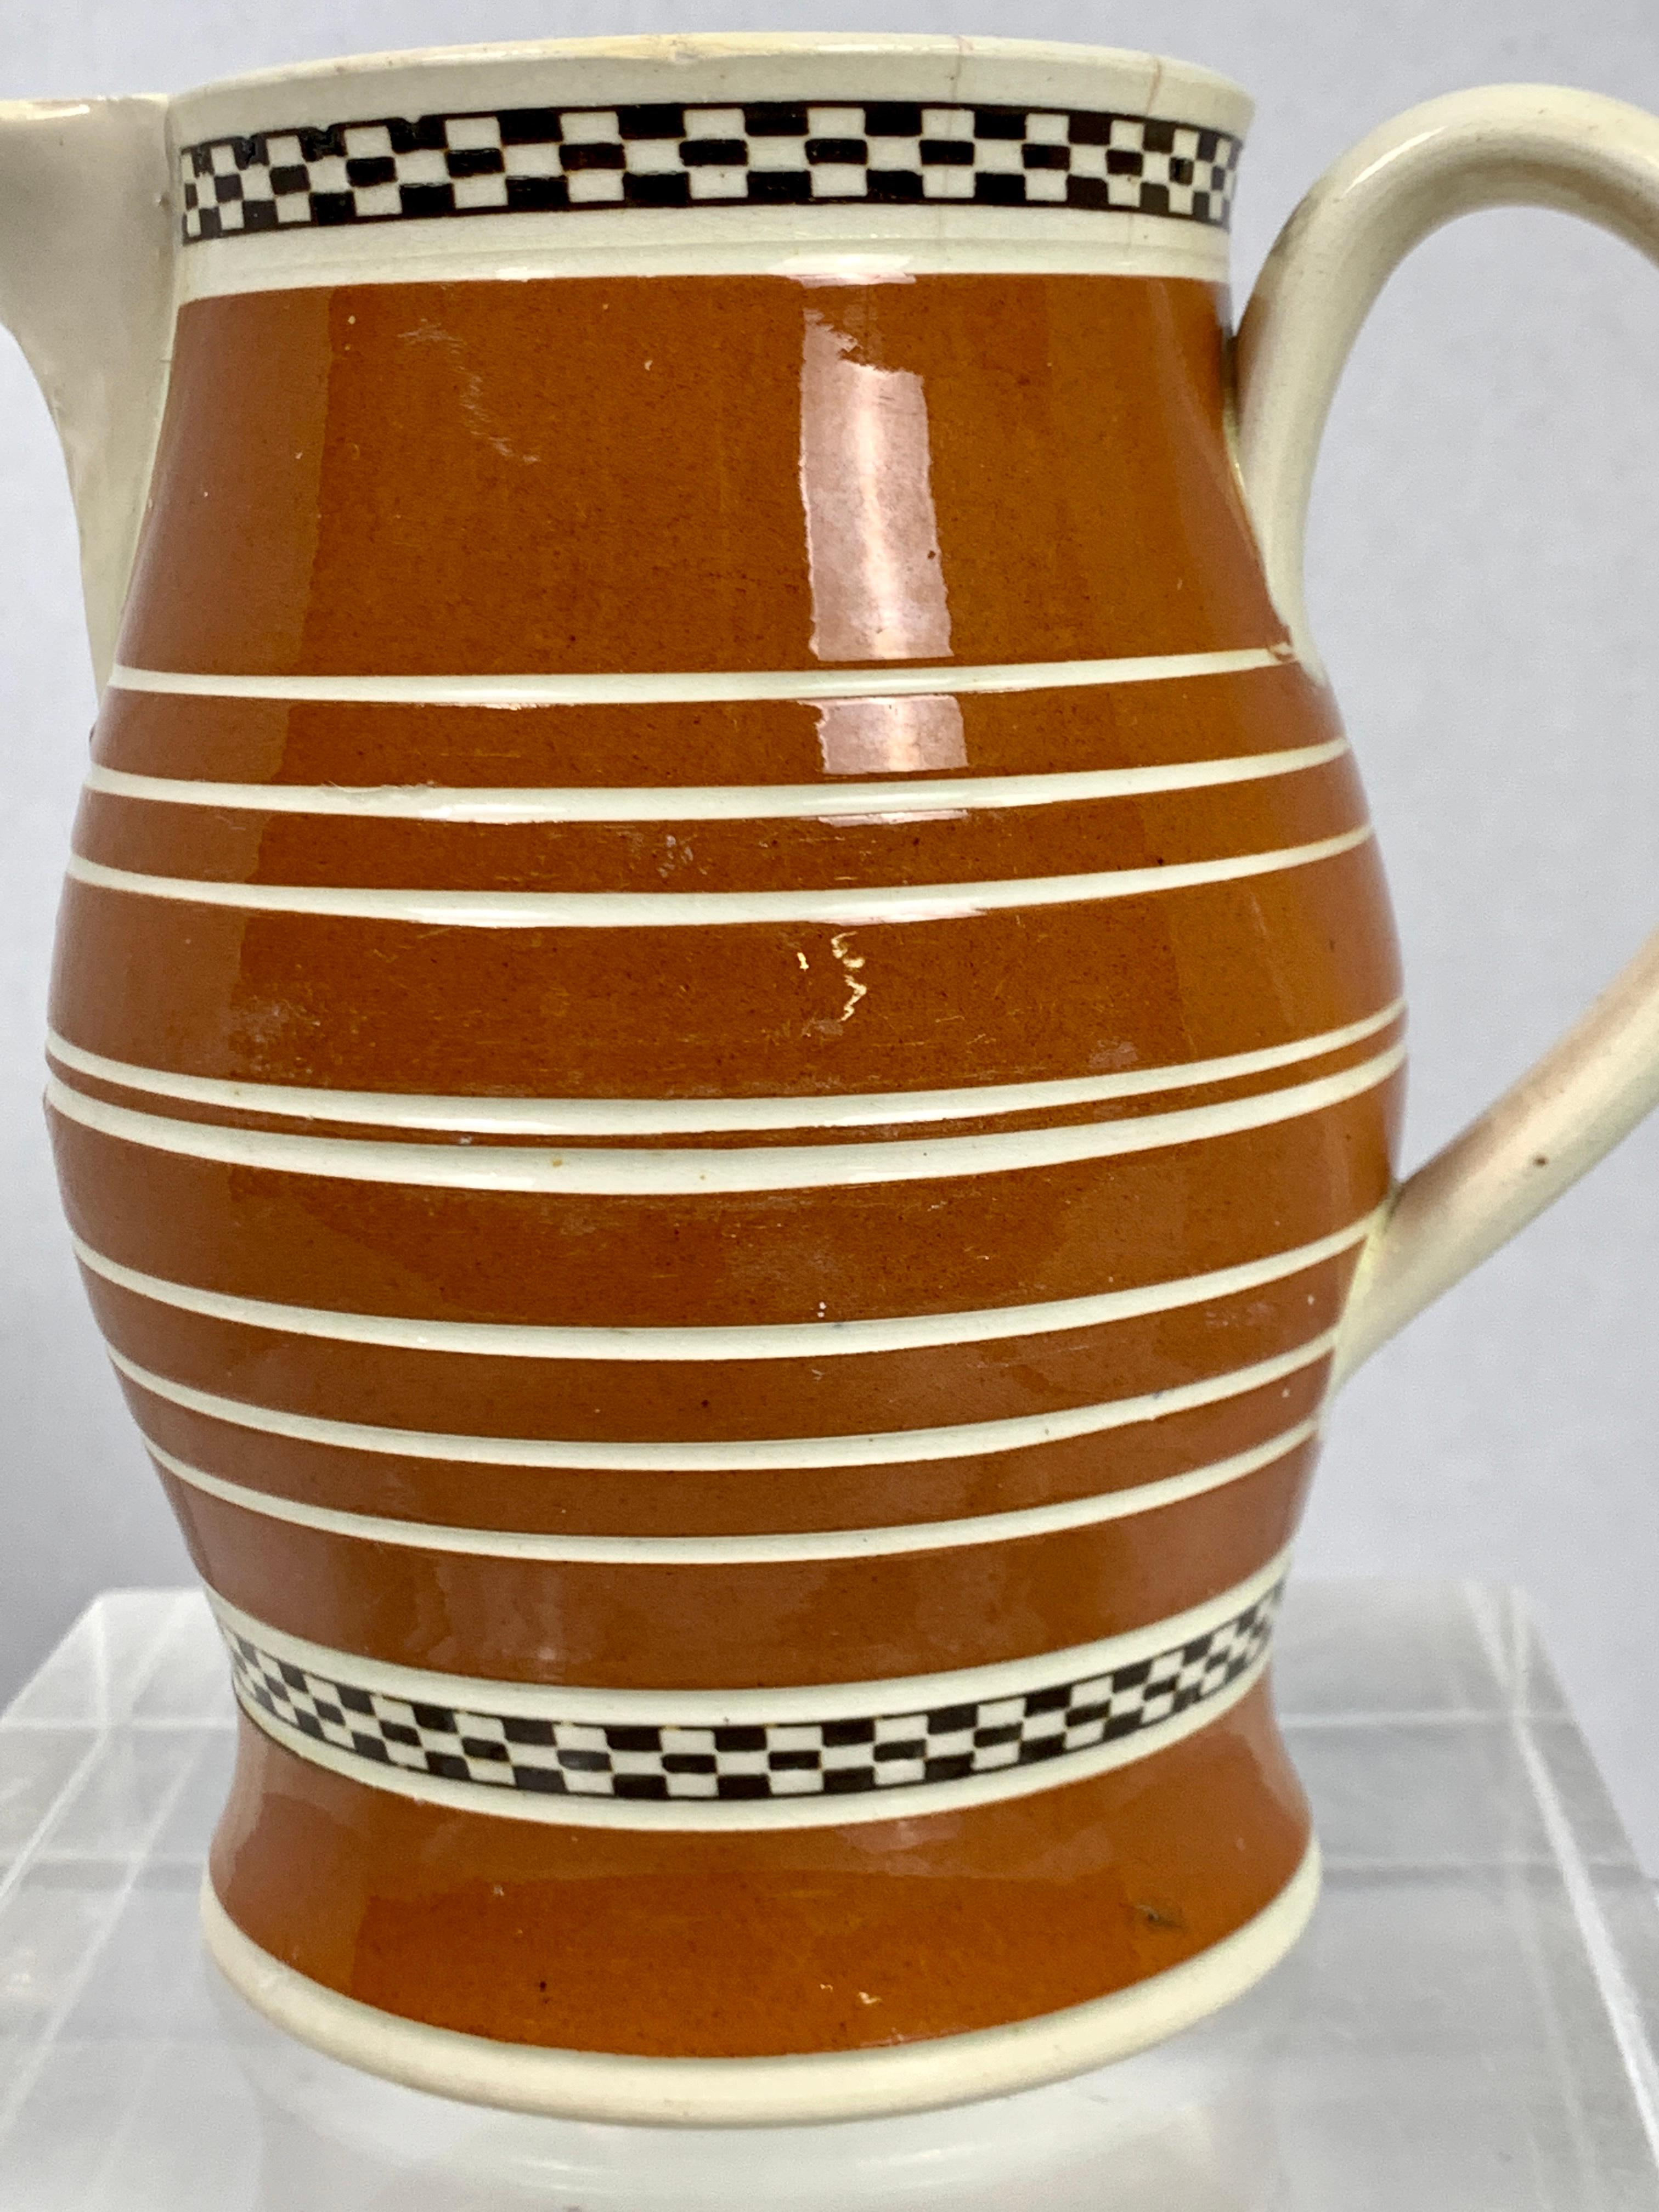 Made in England circa 1815 this mochaware pitcher is decorated with bands of lovely milk chocolate-colored slip. 
The color works beautifully with the unpainted creamware body of the handle and interior of the pitcher.
Just below the top edge, we